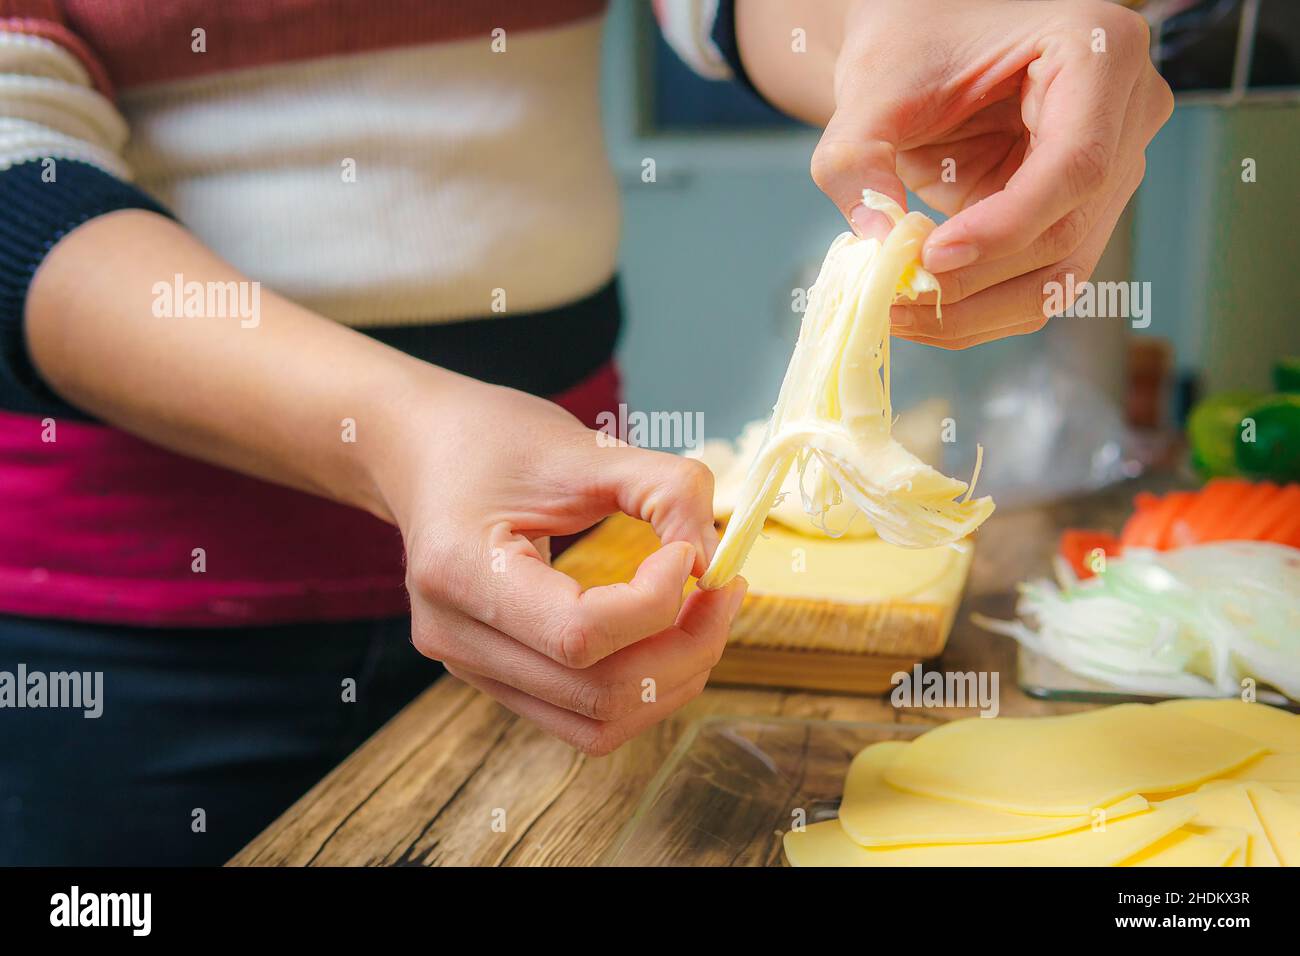 Hands using a cheese grater Stock Photo - Alamy